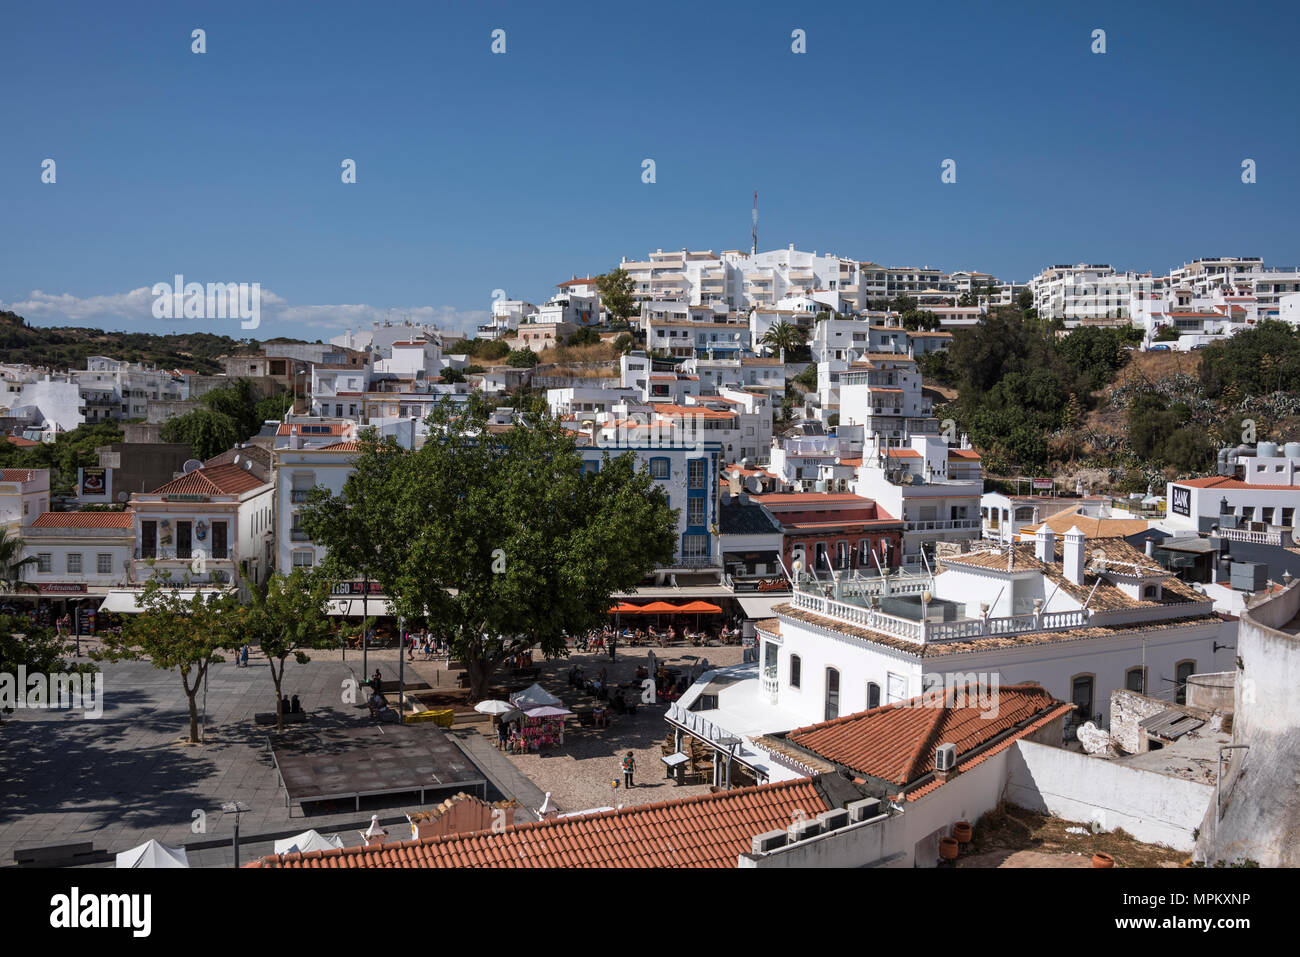 View over Albufeira Old Town, Algarve, Portugal Stock Photo